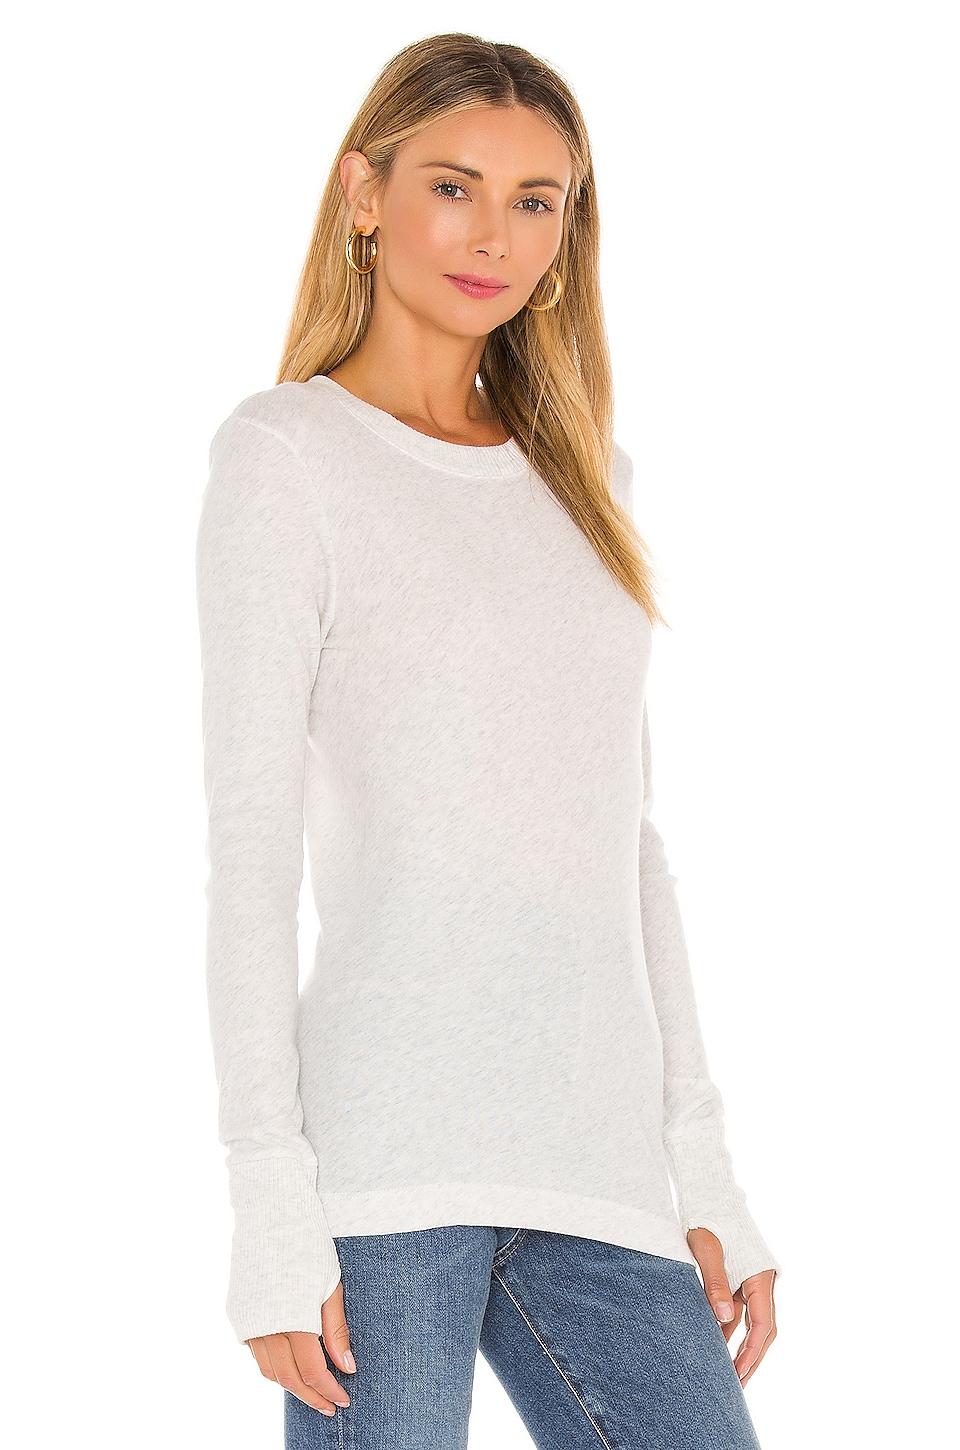 Enza Costa Cashmere Fitted Crew Neck Sweater - Lyst